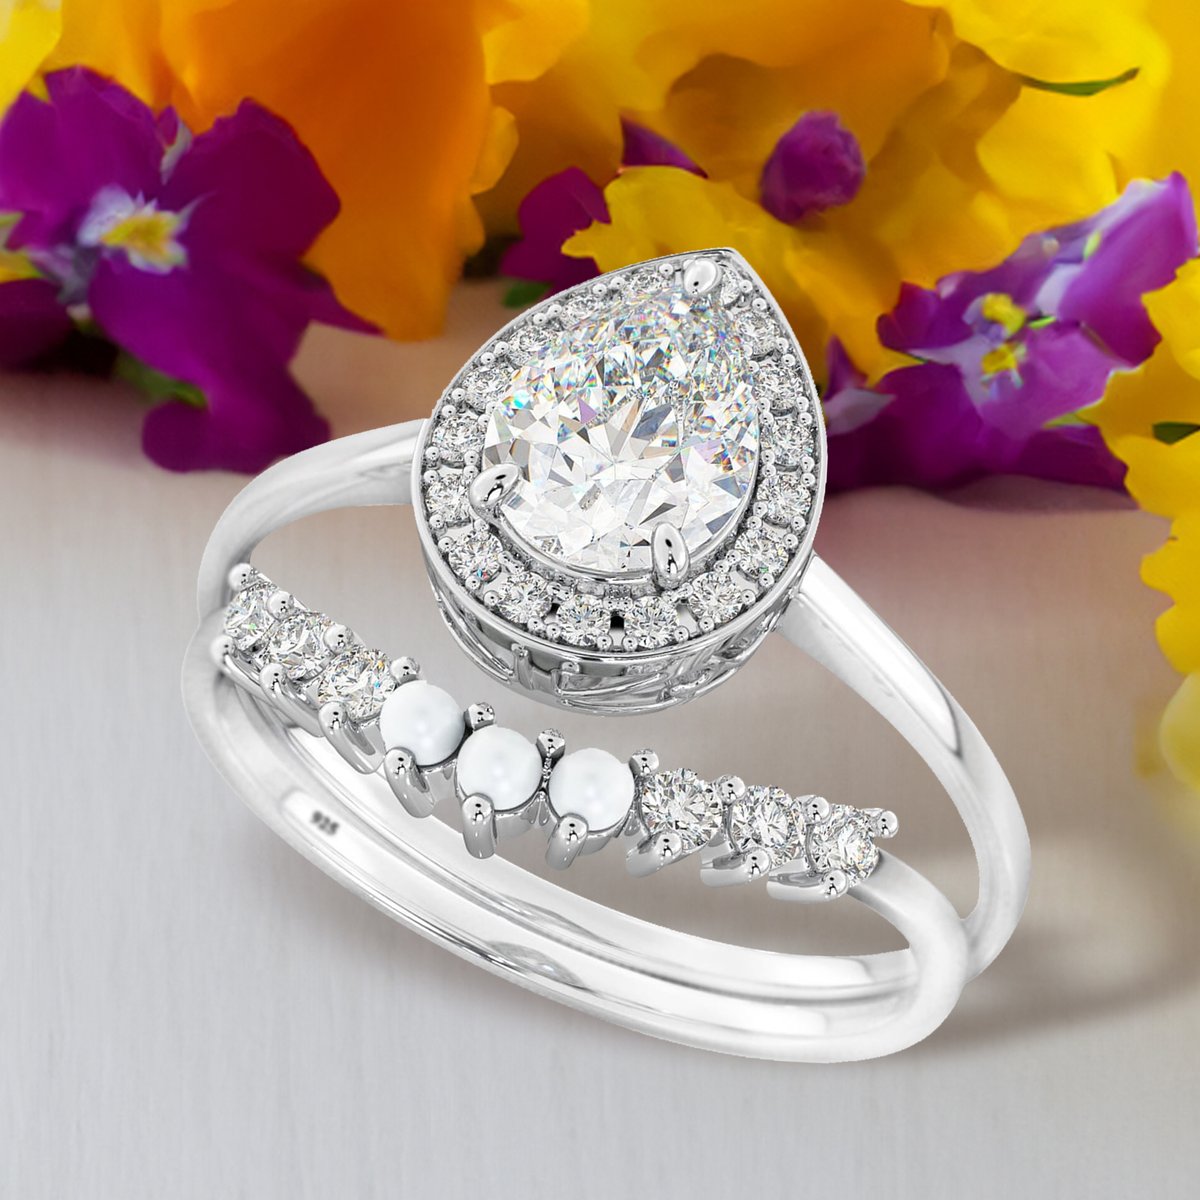 Such a special sterling silver ring from Best to Have 💍🥰

Buy now: bit.ly/3oCIW36

#womenrings #weddingrings #lovejewelry #silverjewelry #sterlingsilver #cubiczirconia #fashion #glamorous #besttohave #besttohavejewelry #gift #present #silverring #zirconia #silver925